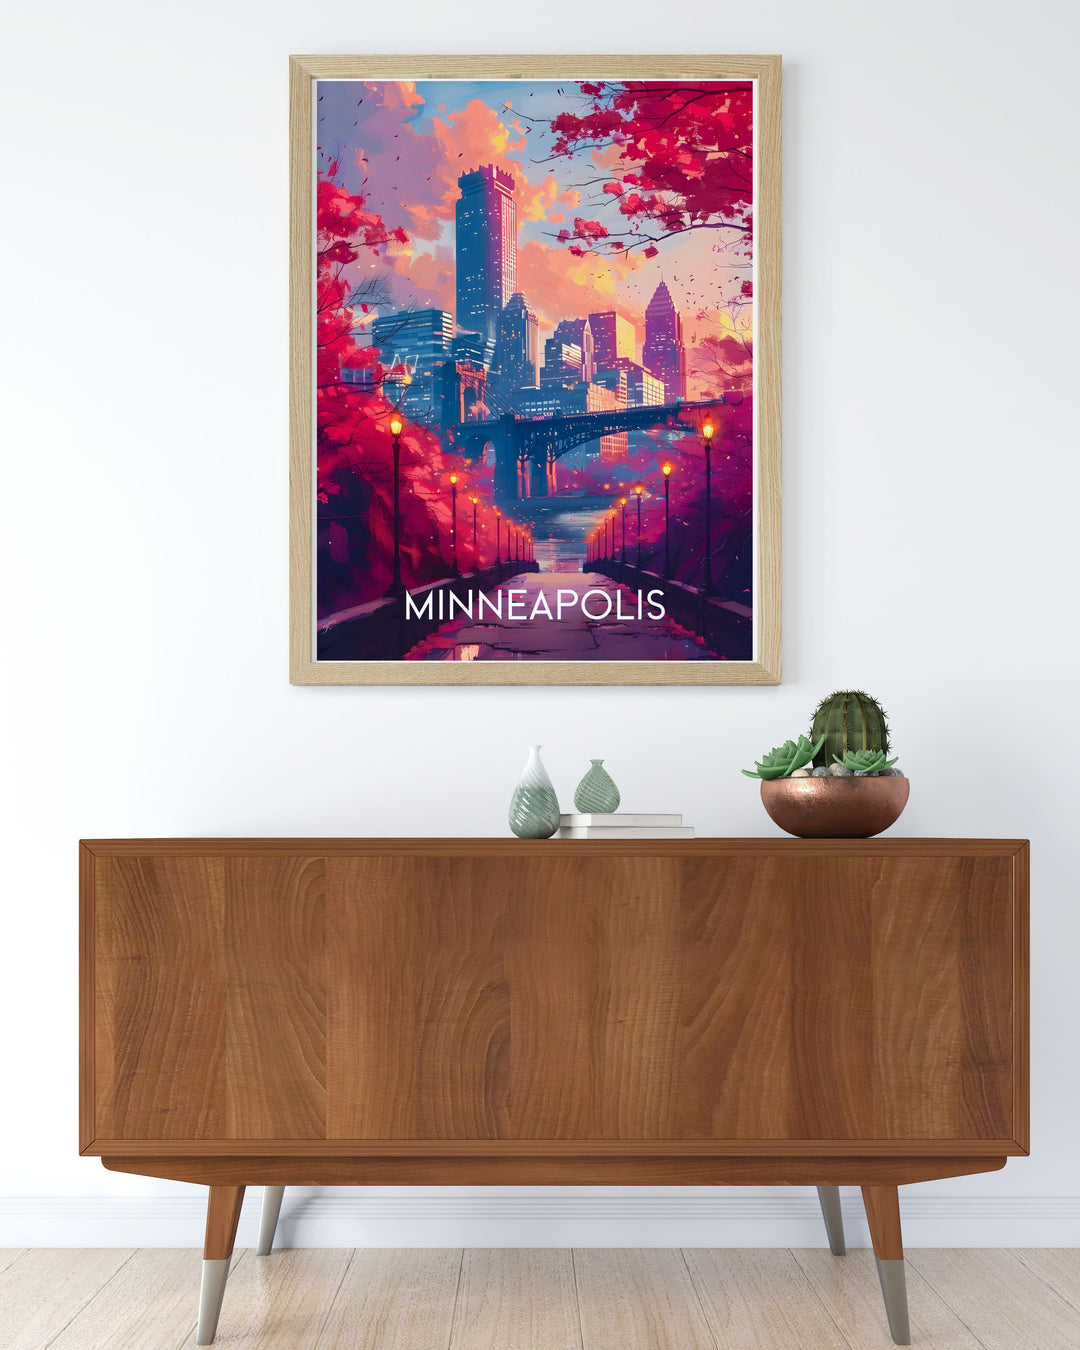 This vibrant art print of the Minneapolis Skyline highlights the citys architectural innovation and vibrant energy, making it a standout piece for those who appreciate modern urban environments.